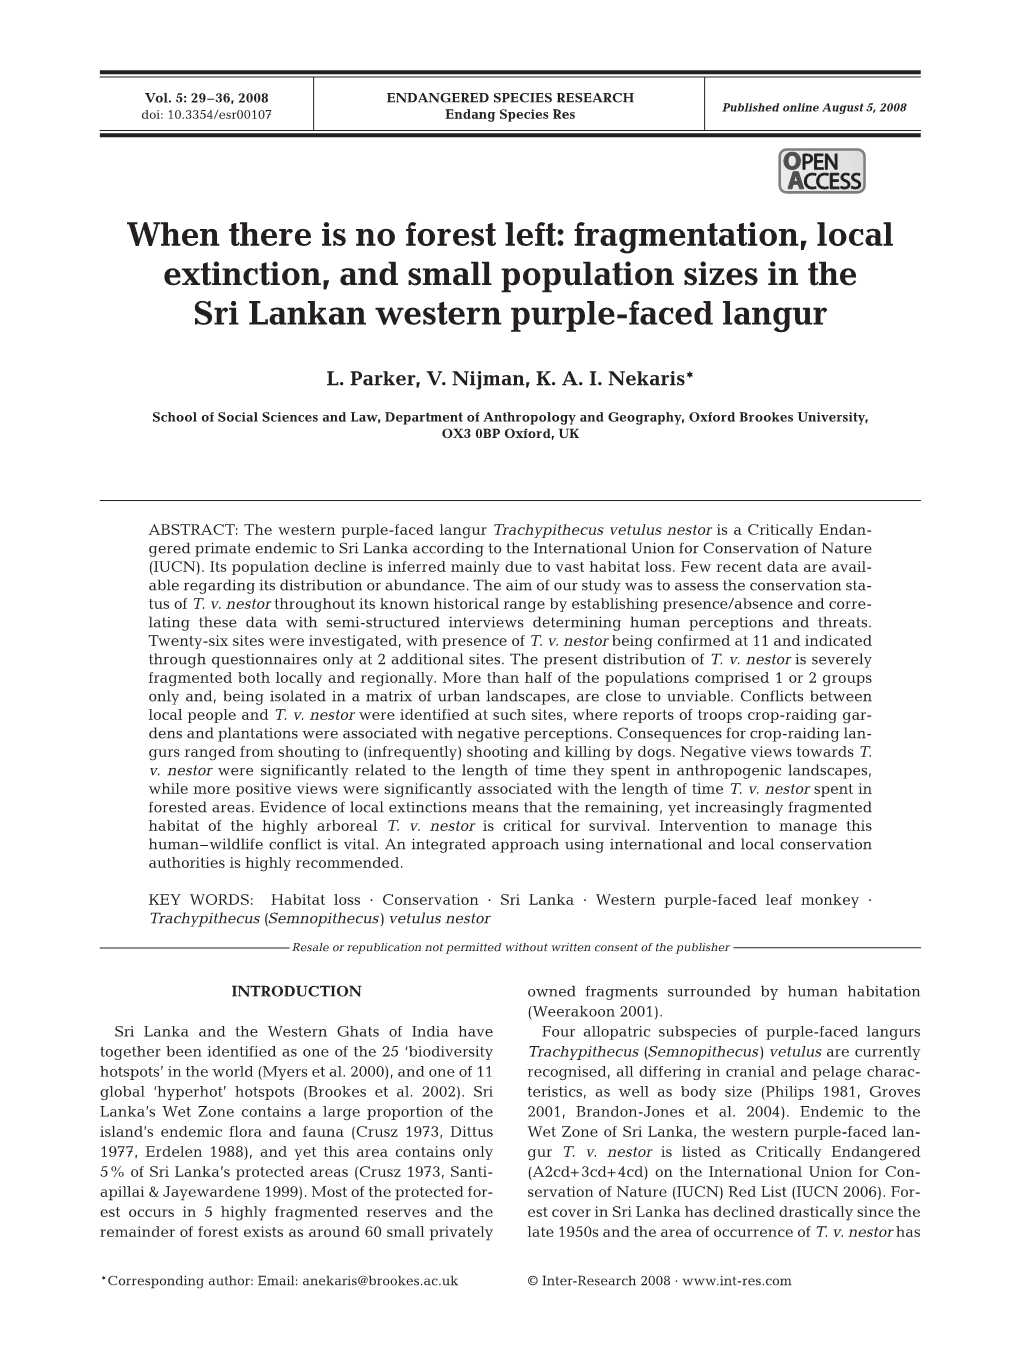 When There Is No Forest Left: Fragmentation, Local Extinction, and Small Population Sizes in the Sri Lankan Western Purple-Faced Langur